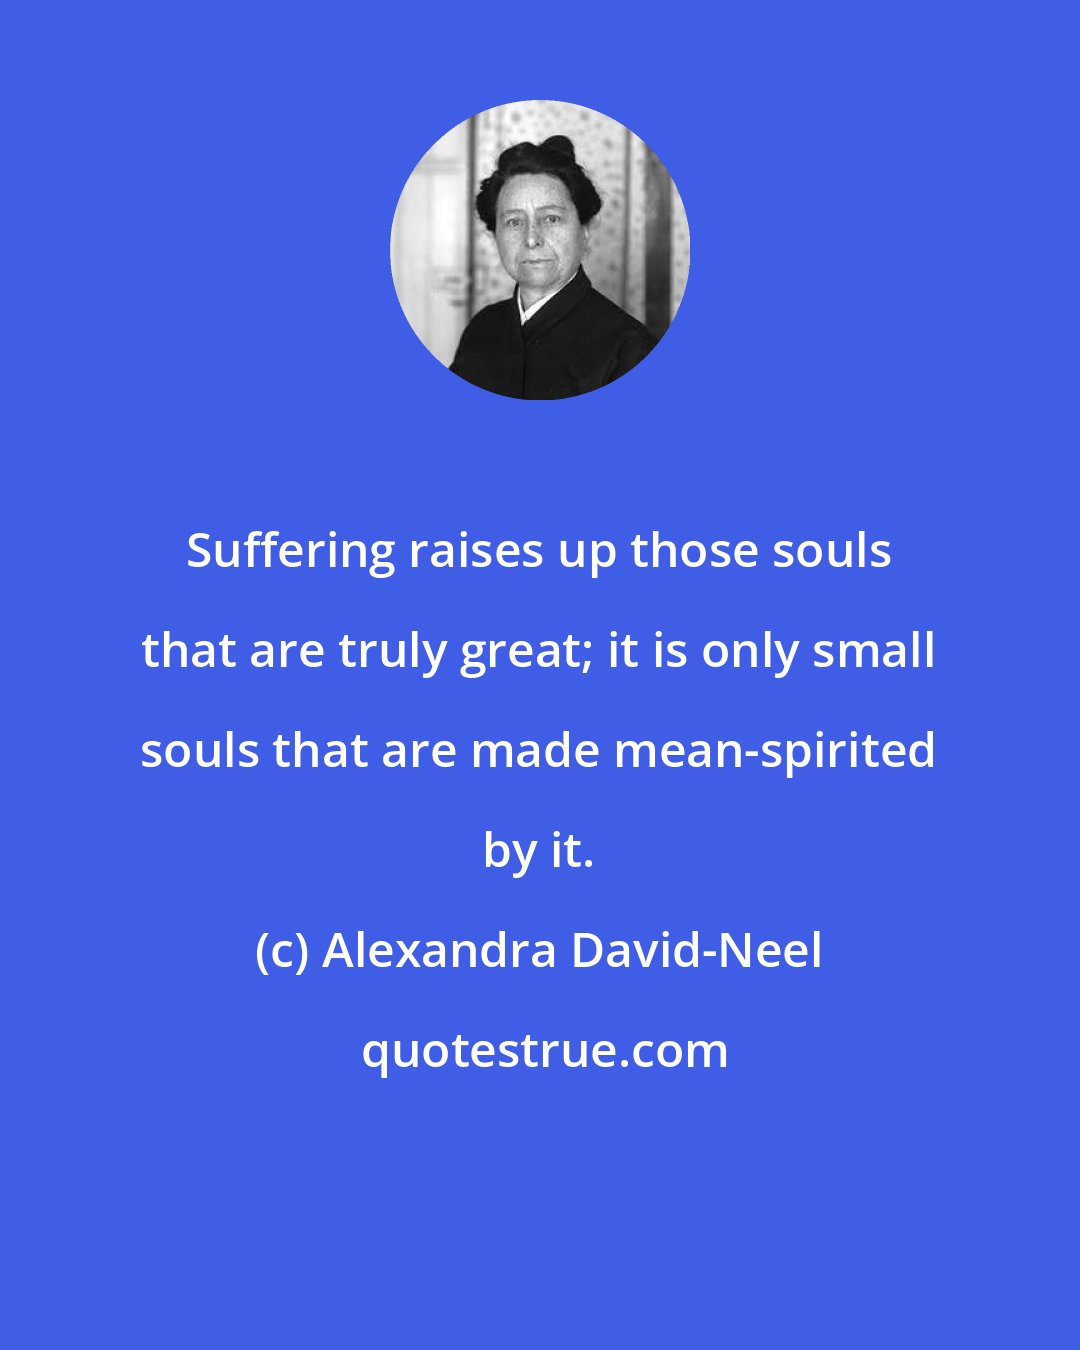 Alexandra David-Neel: Suffering raises up those souls that are truly great; it is only small souls that are made mean-spirited by it.